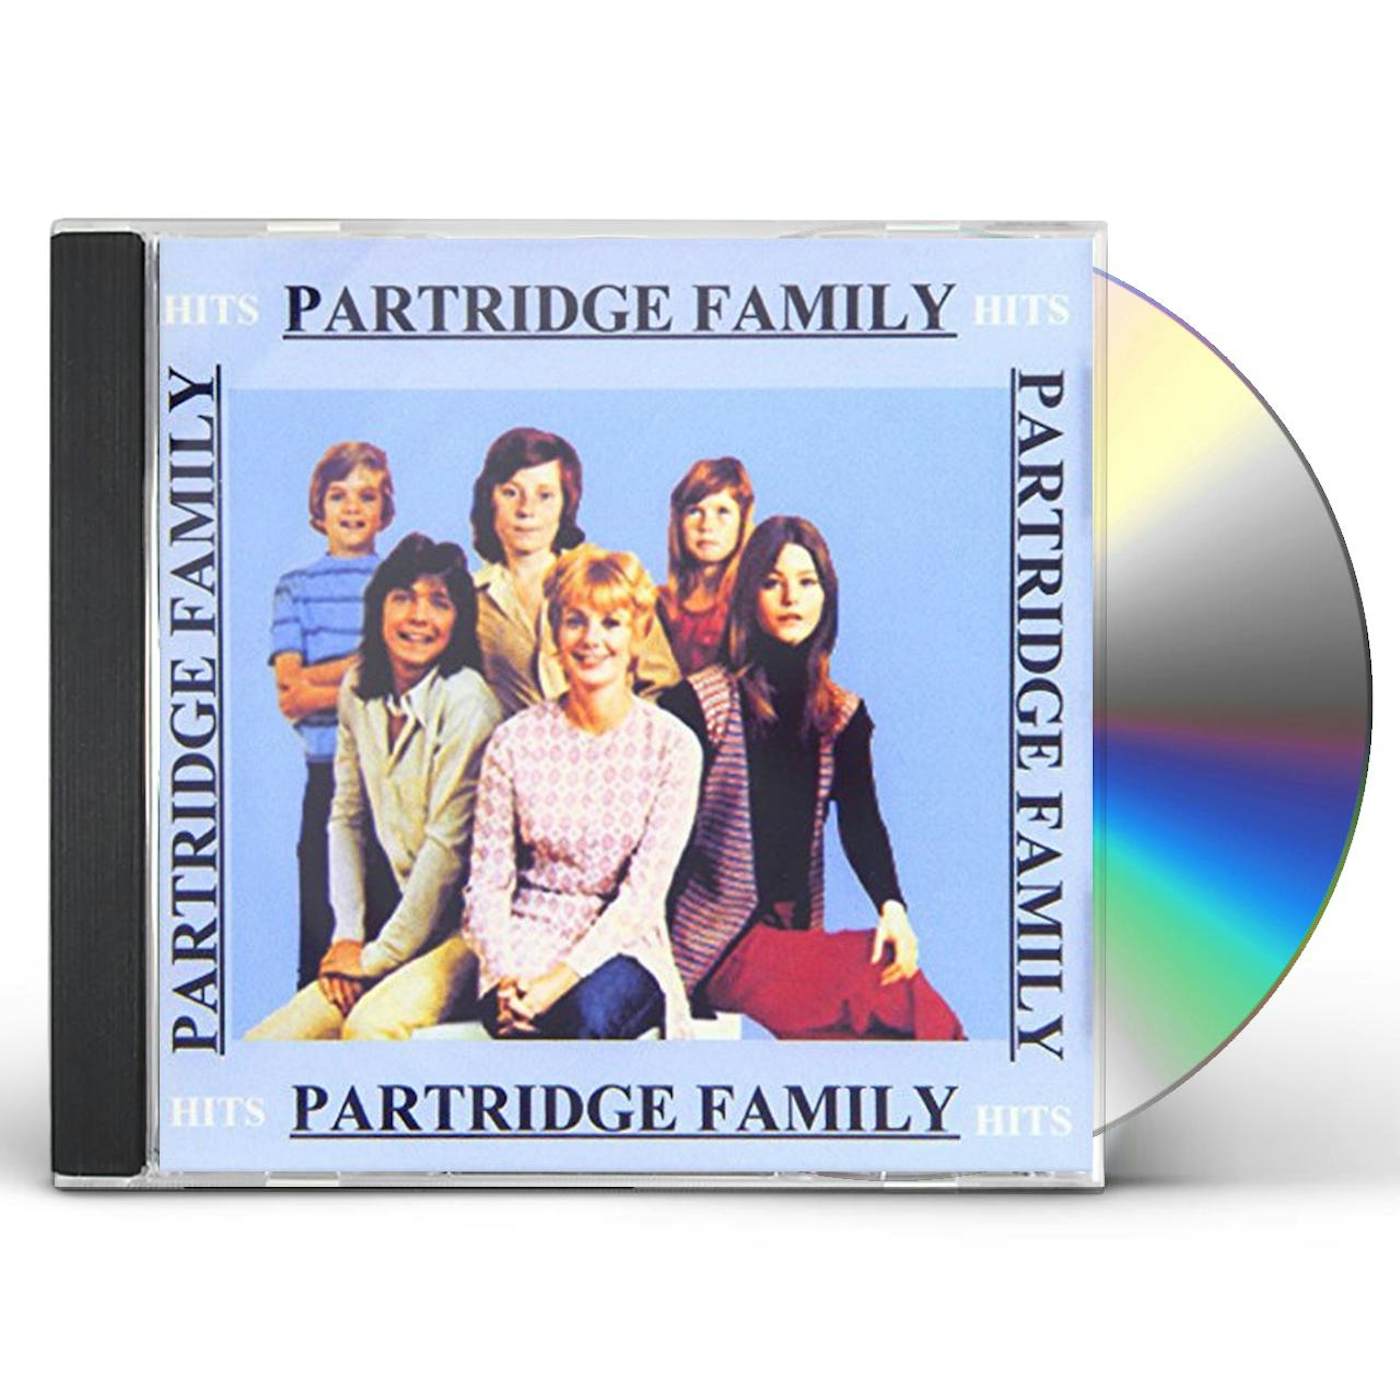 A Partridge Family Christmas Card - Audio CD By PARTRIDGE FAMILY